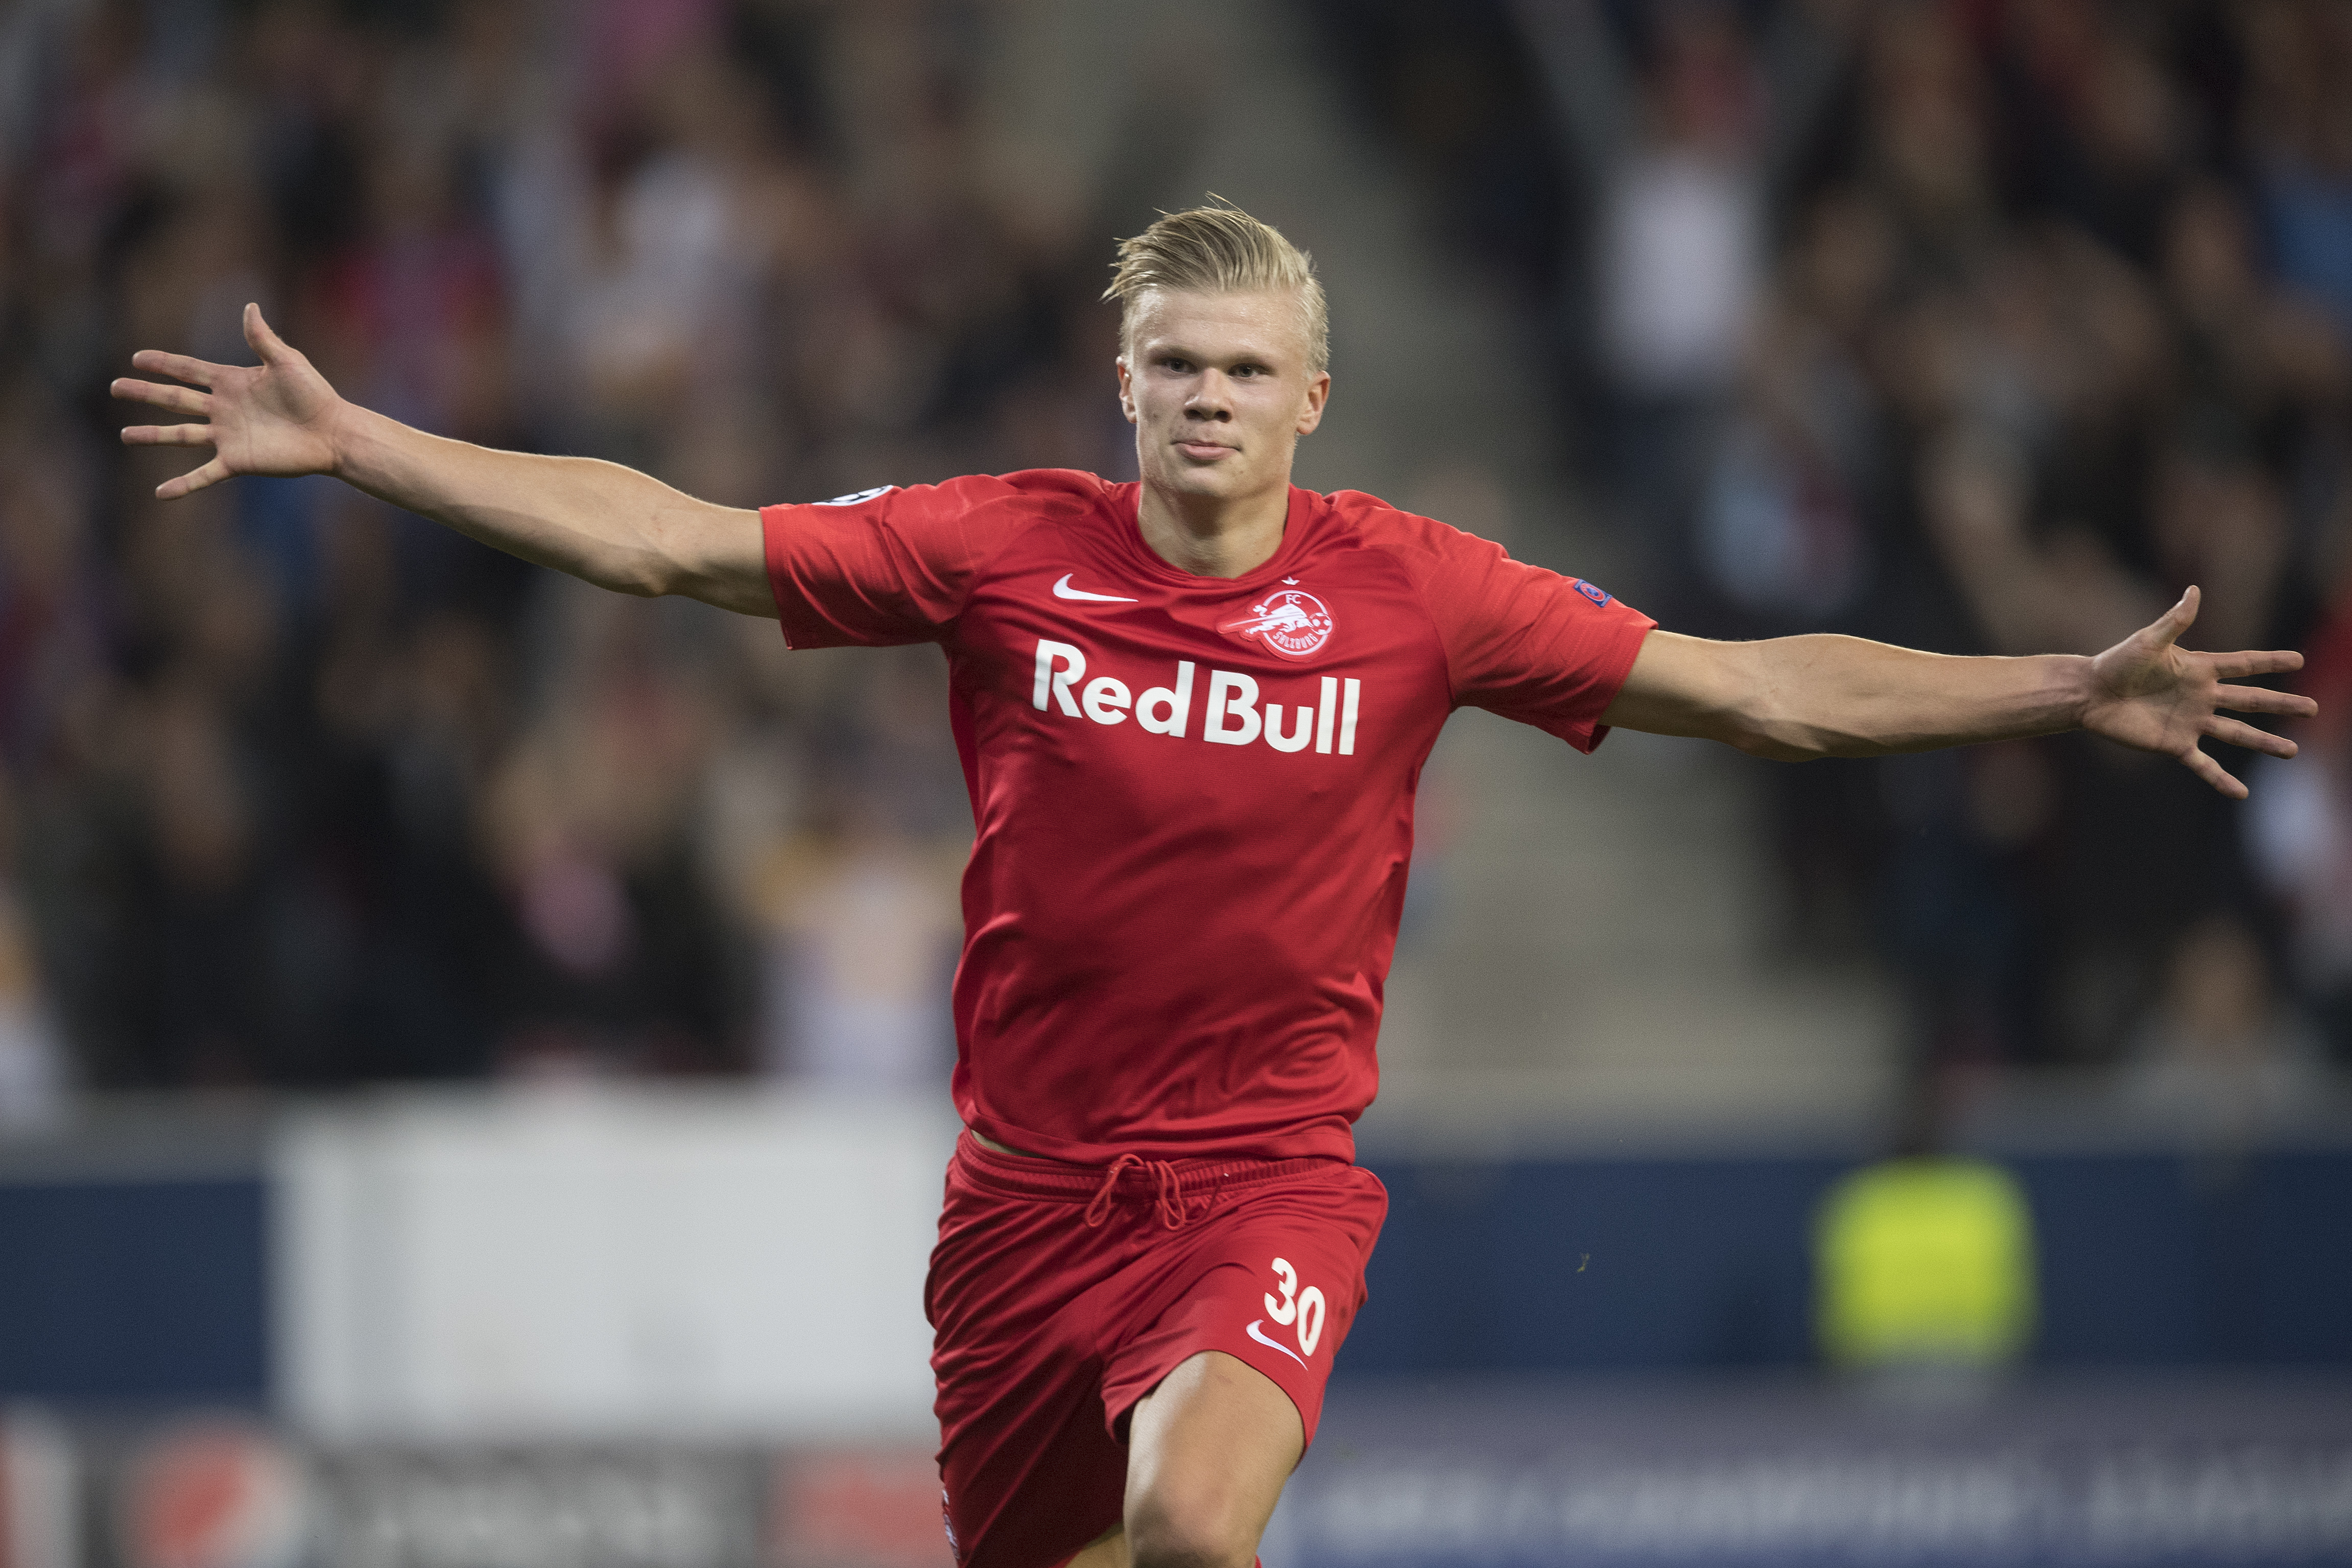 SALZBURG, AUSTRIA - SEPTEMBER 17:  Erling Haaland of FC Salzburg celebrates after scoring the goal for 2:0 during the Champions League group E match between FC Salzburg and KRC Genk at Salzburg Stadion on September 17, 2019 in Salzburg, Austria. (Photo by Andreas Schaad/Bongarts/Getty Images)